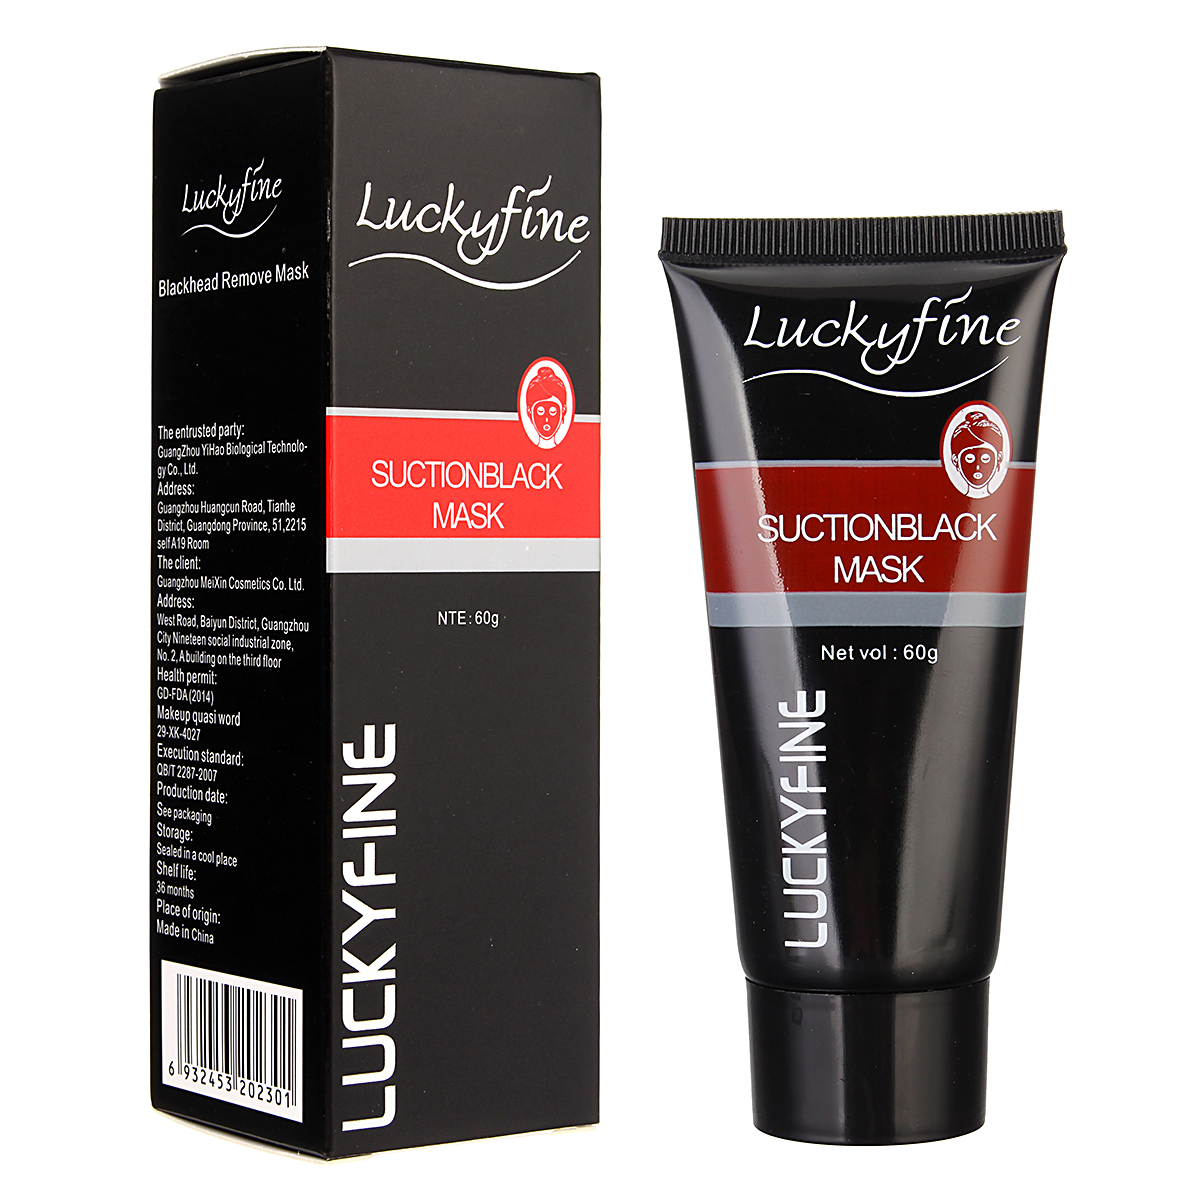 

Luckyfine Blackhead Removal Peel-off Black Facial Mask Pore Cleaner Purifying Acne Treatment